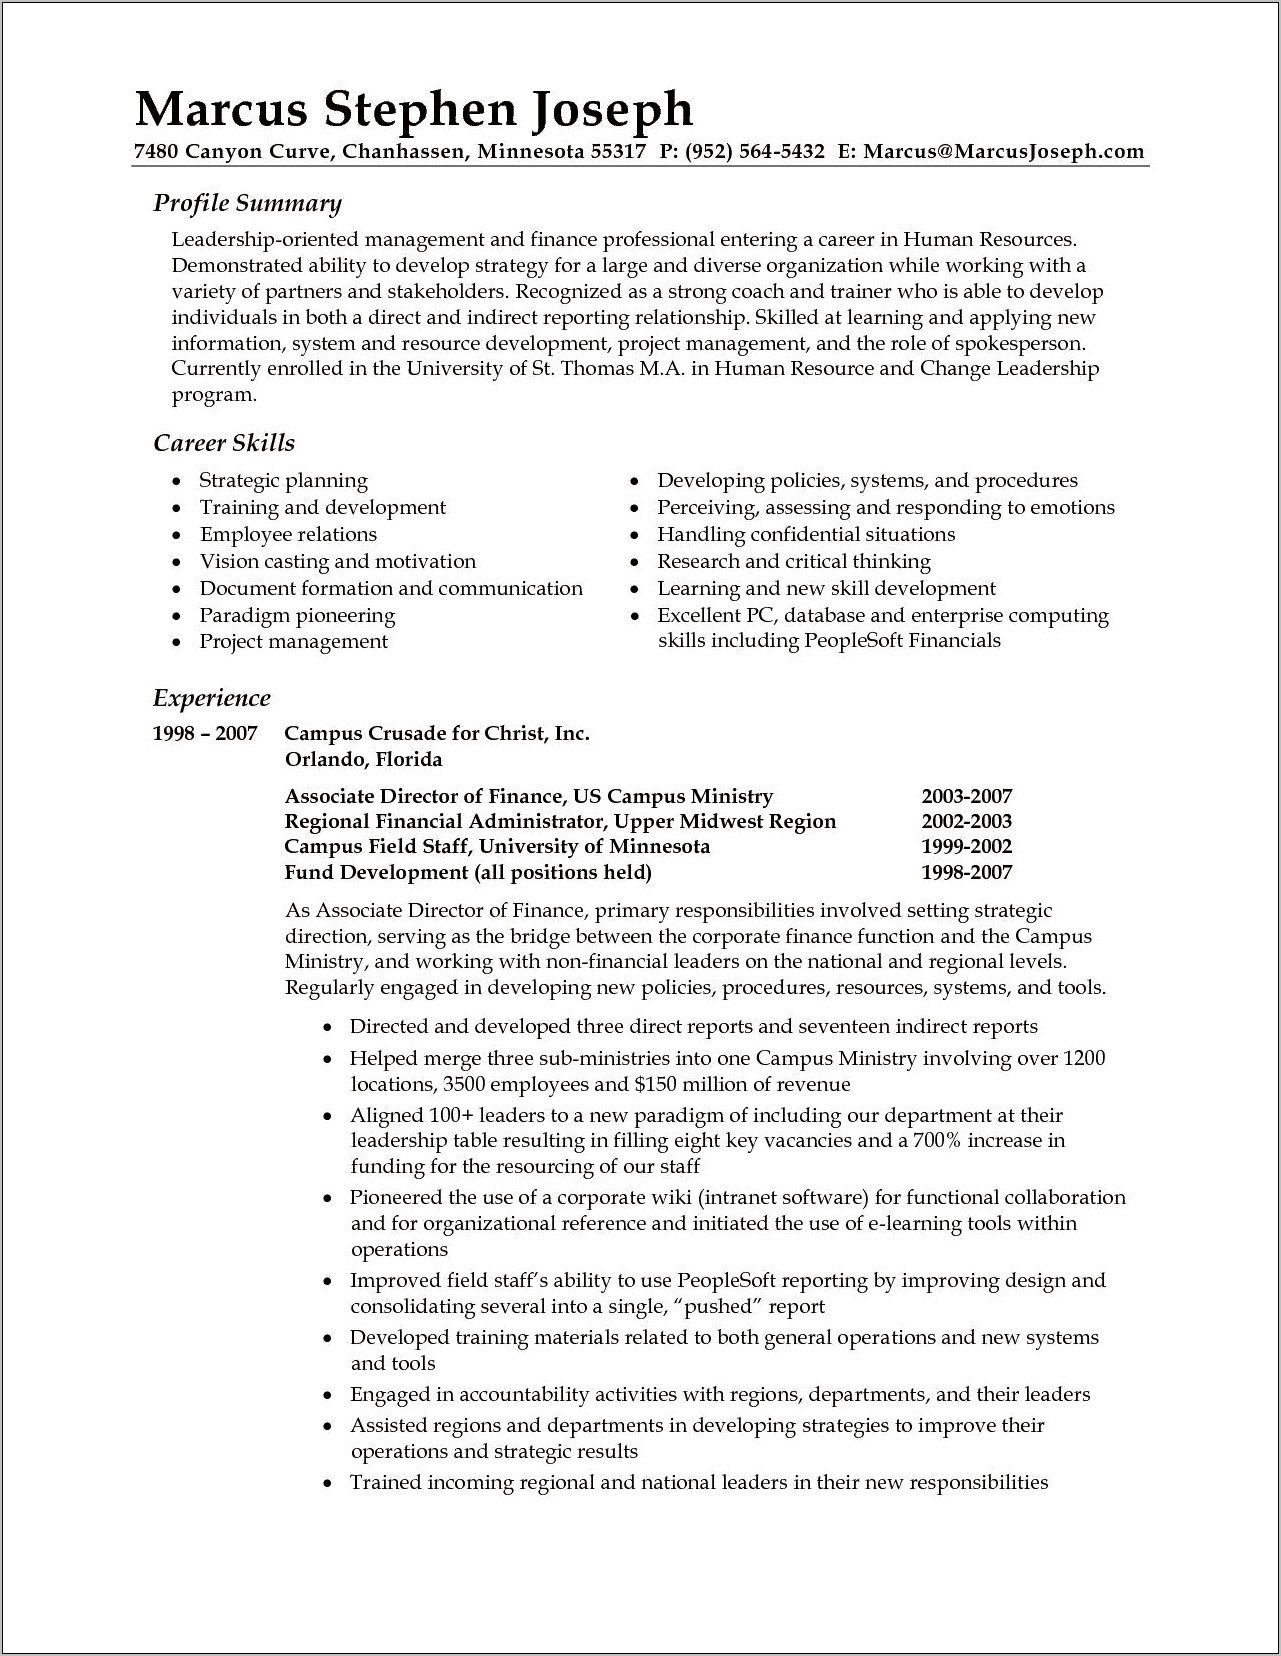 Examples Of Proffecional Summaries For A Resume